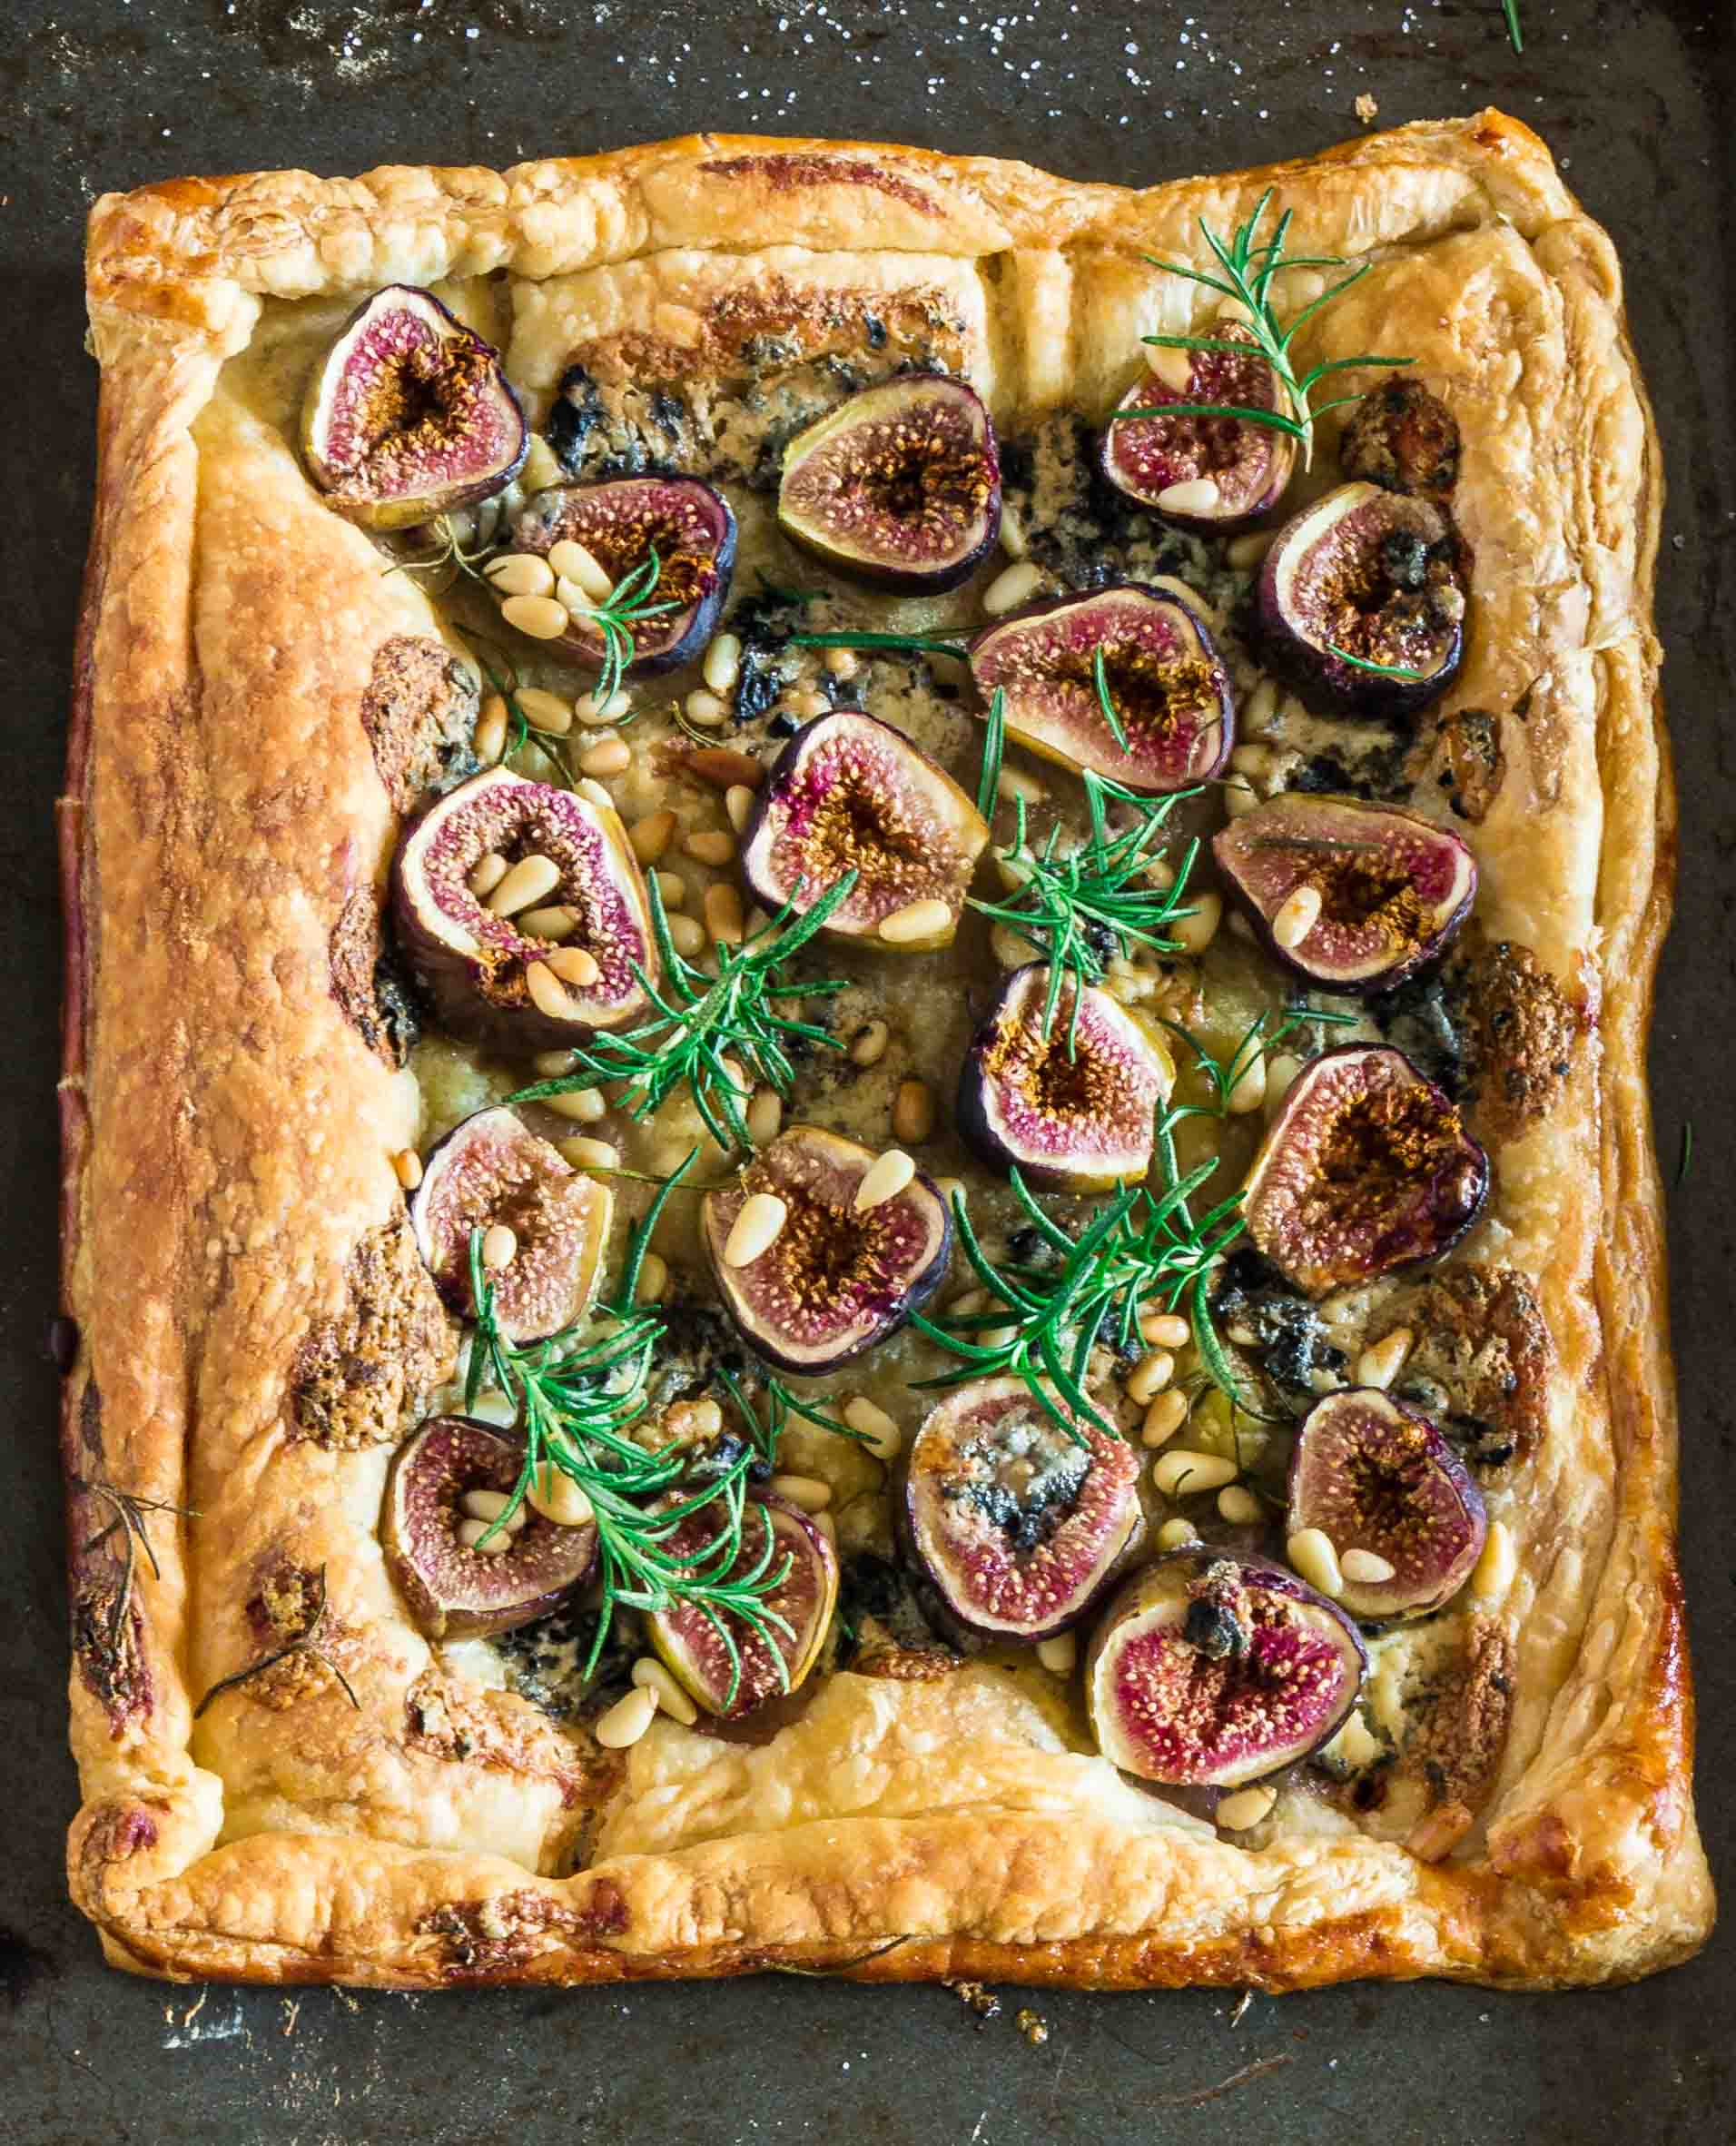 Blue Cheese Fig Tart | www.oliviascuisine.com | A delicious savory and sweet tart, made with blue cheese, fresh figs, rosemary, pine nuts, sea salt and a touch of honey. Serve it for brunch, as an appetizer and/or as a snack and be ready for your tastebuds to start dancing the can-can!